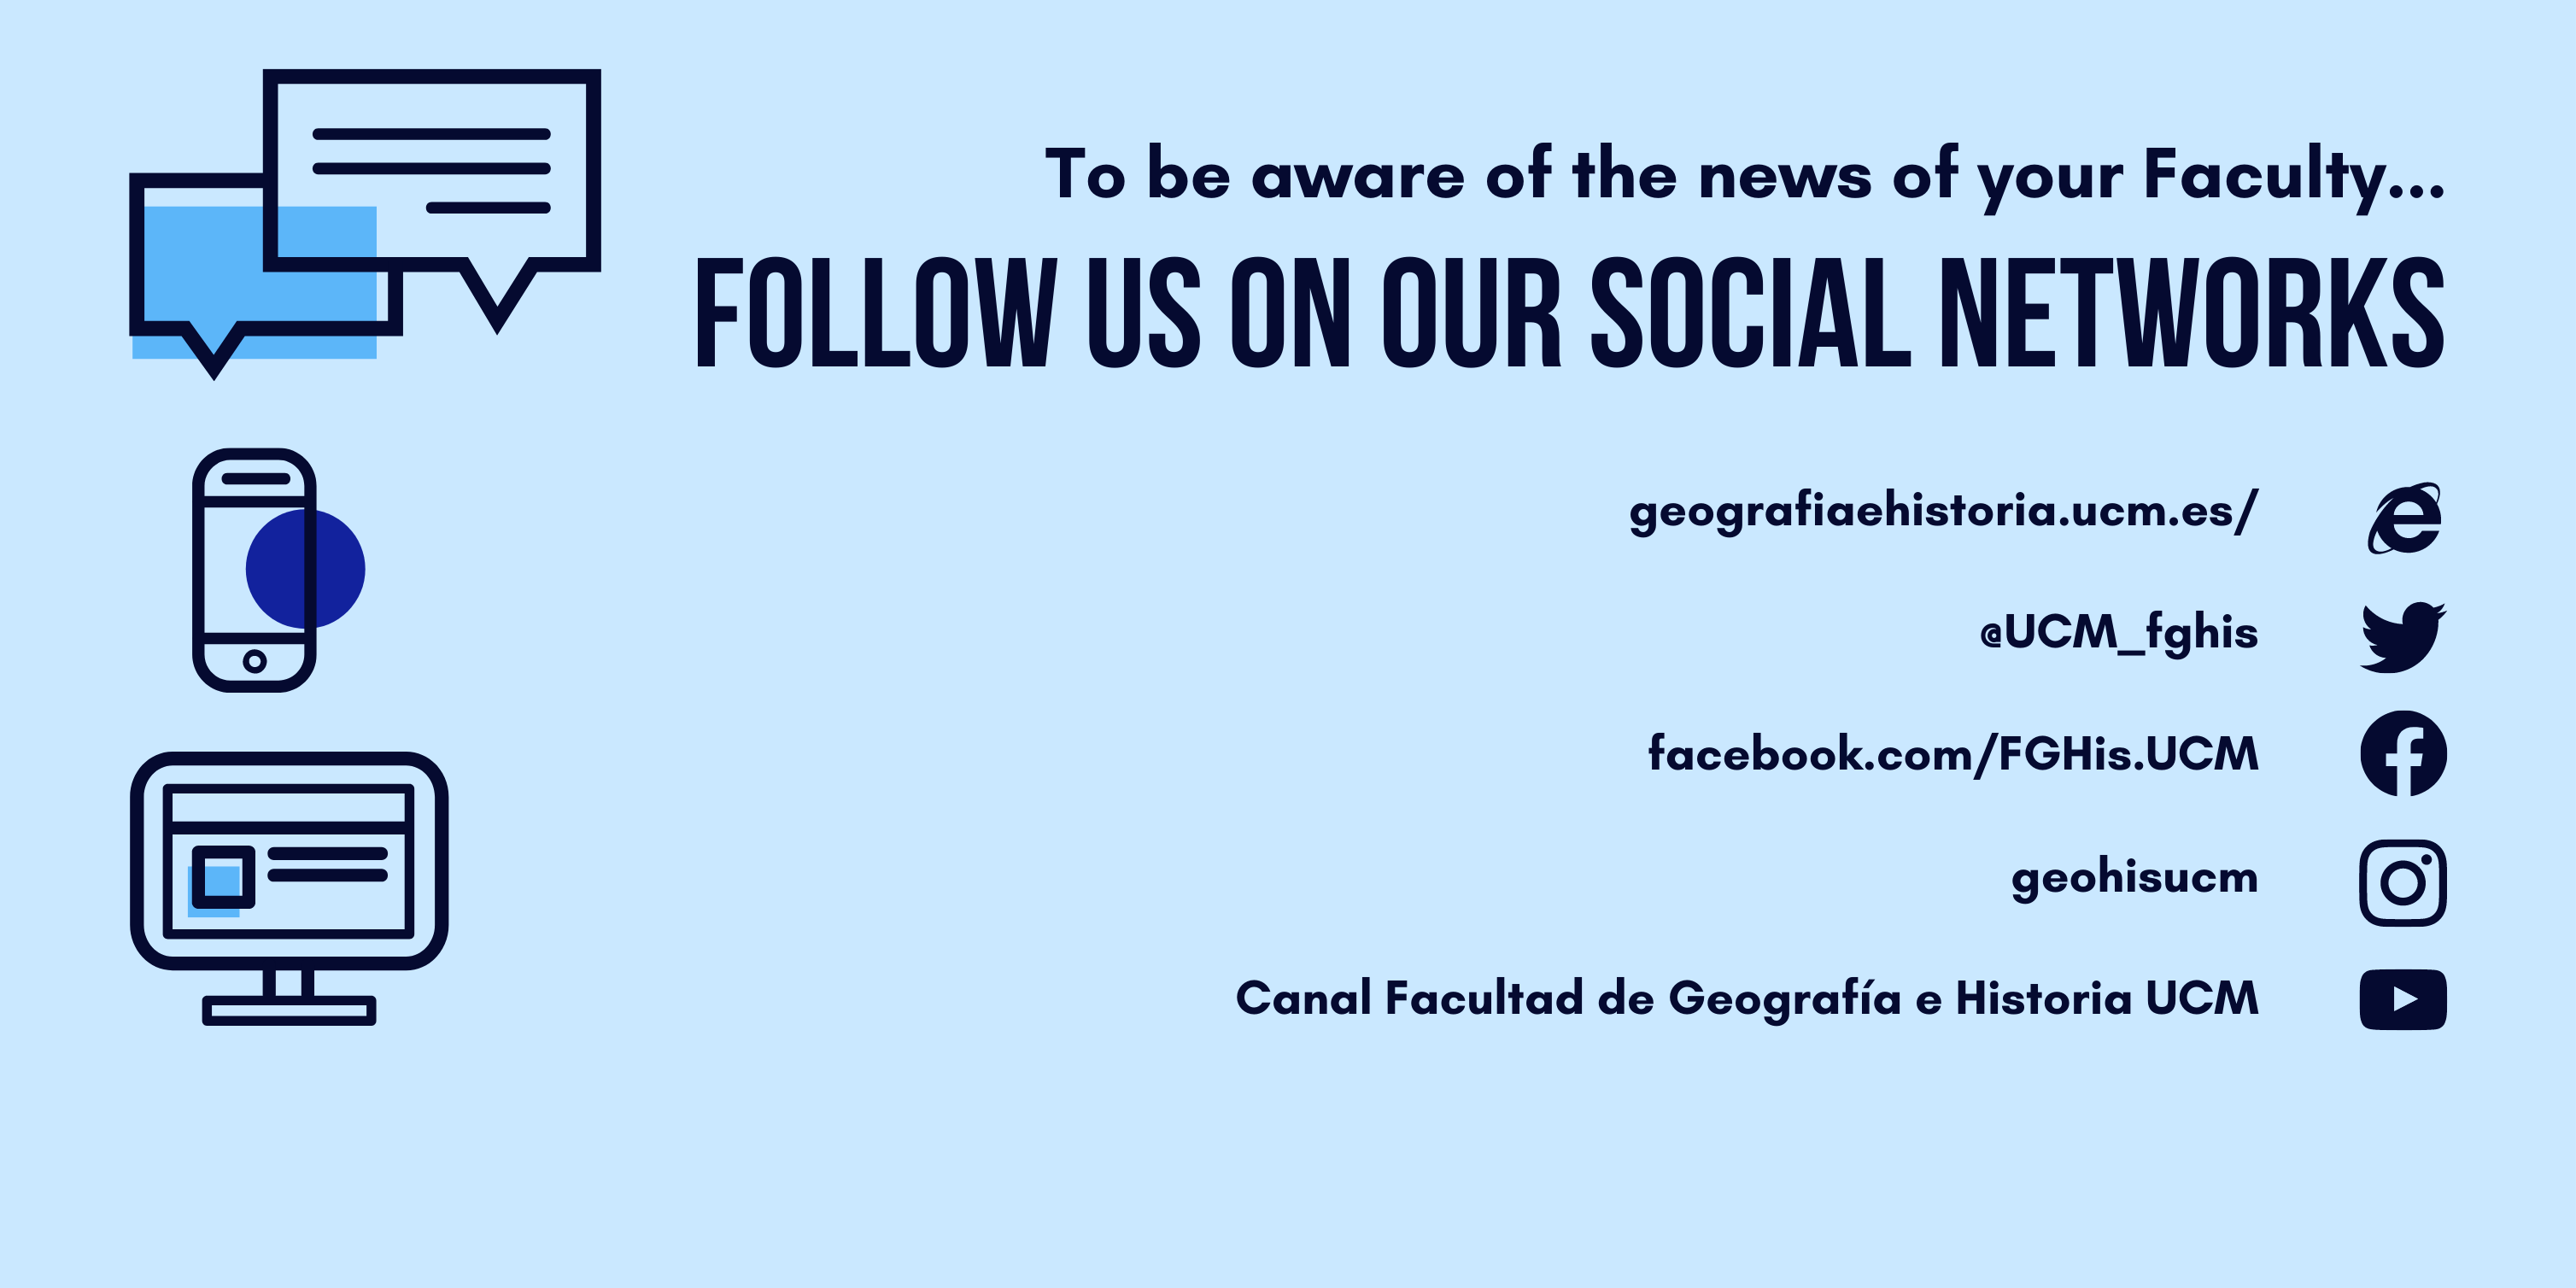 Follow us on our social networks